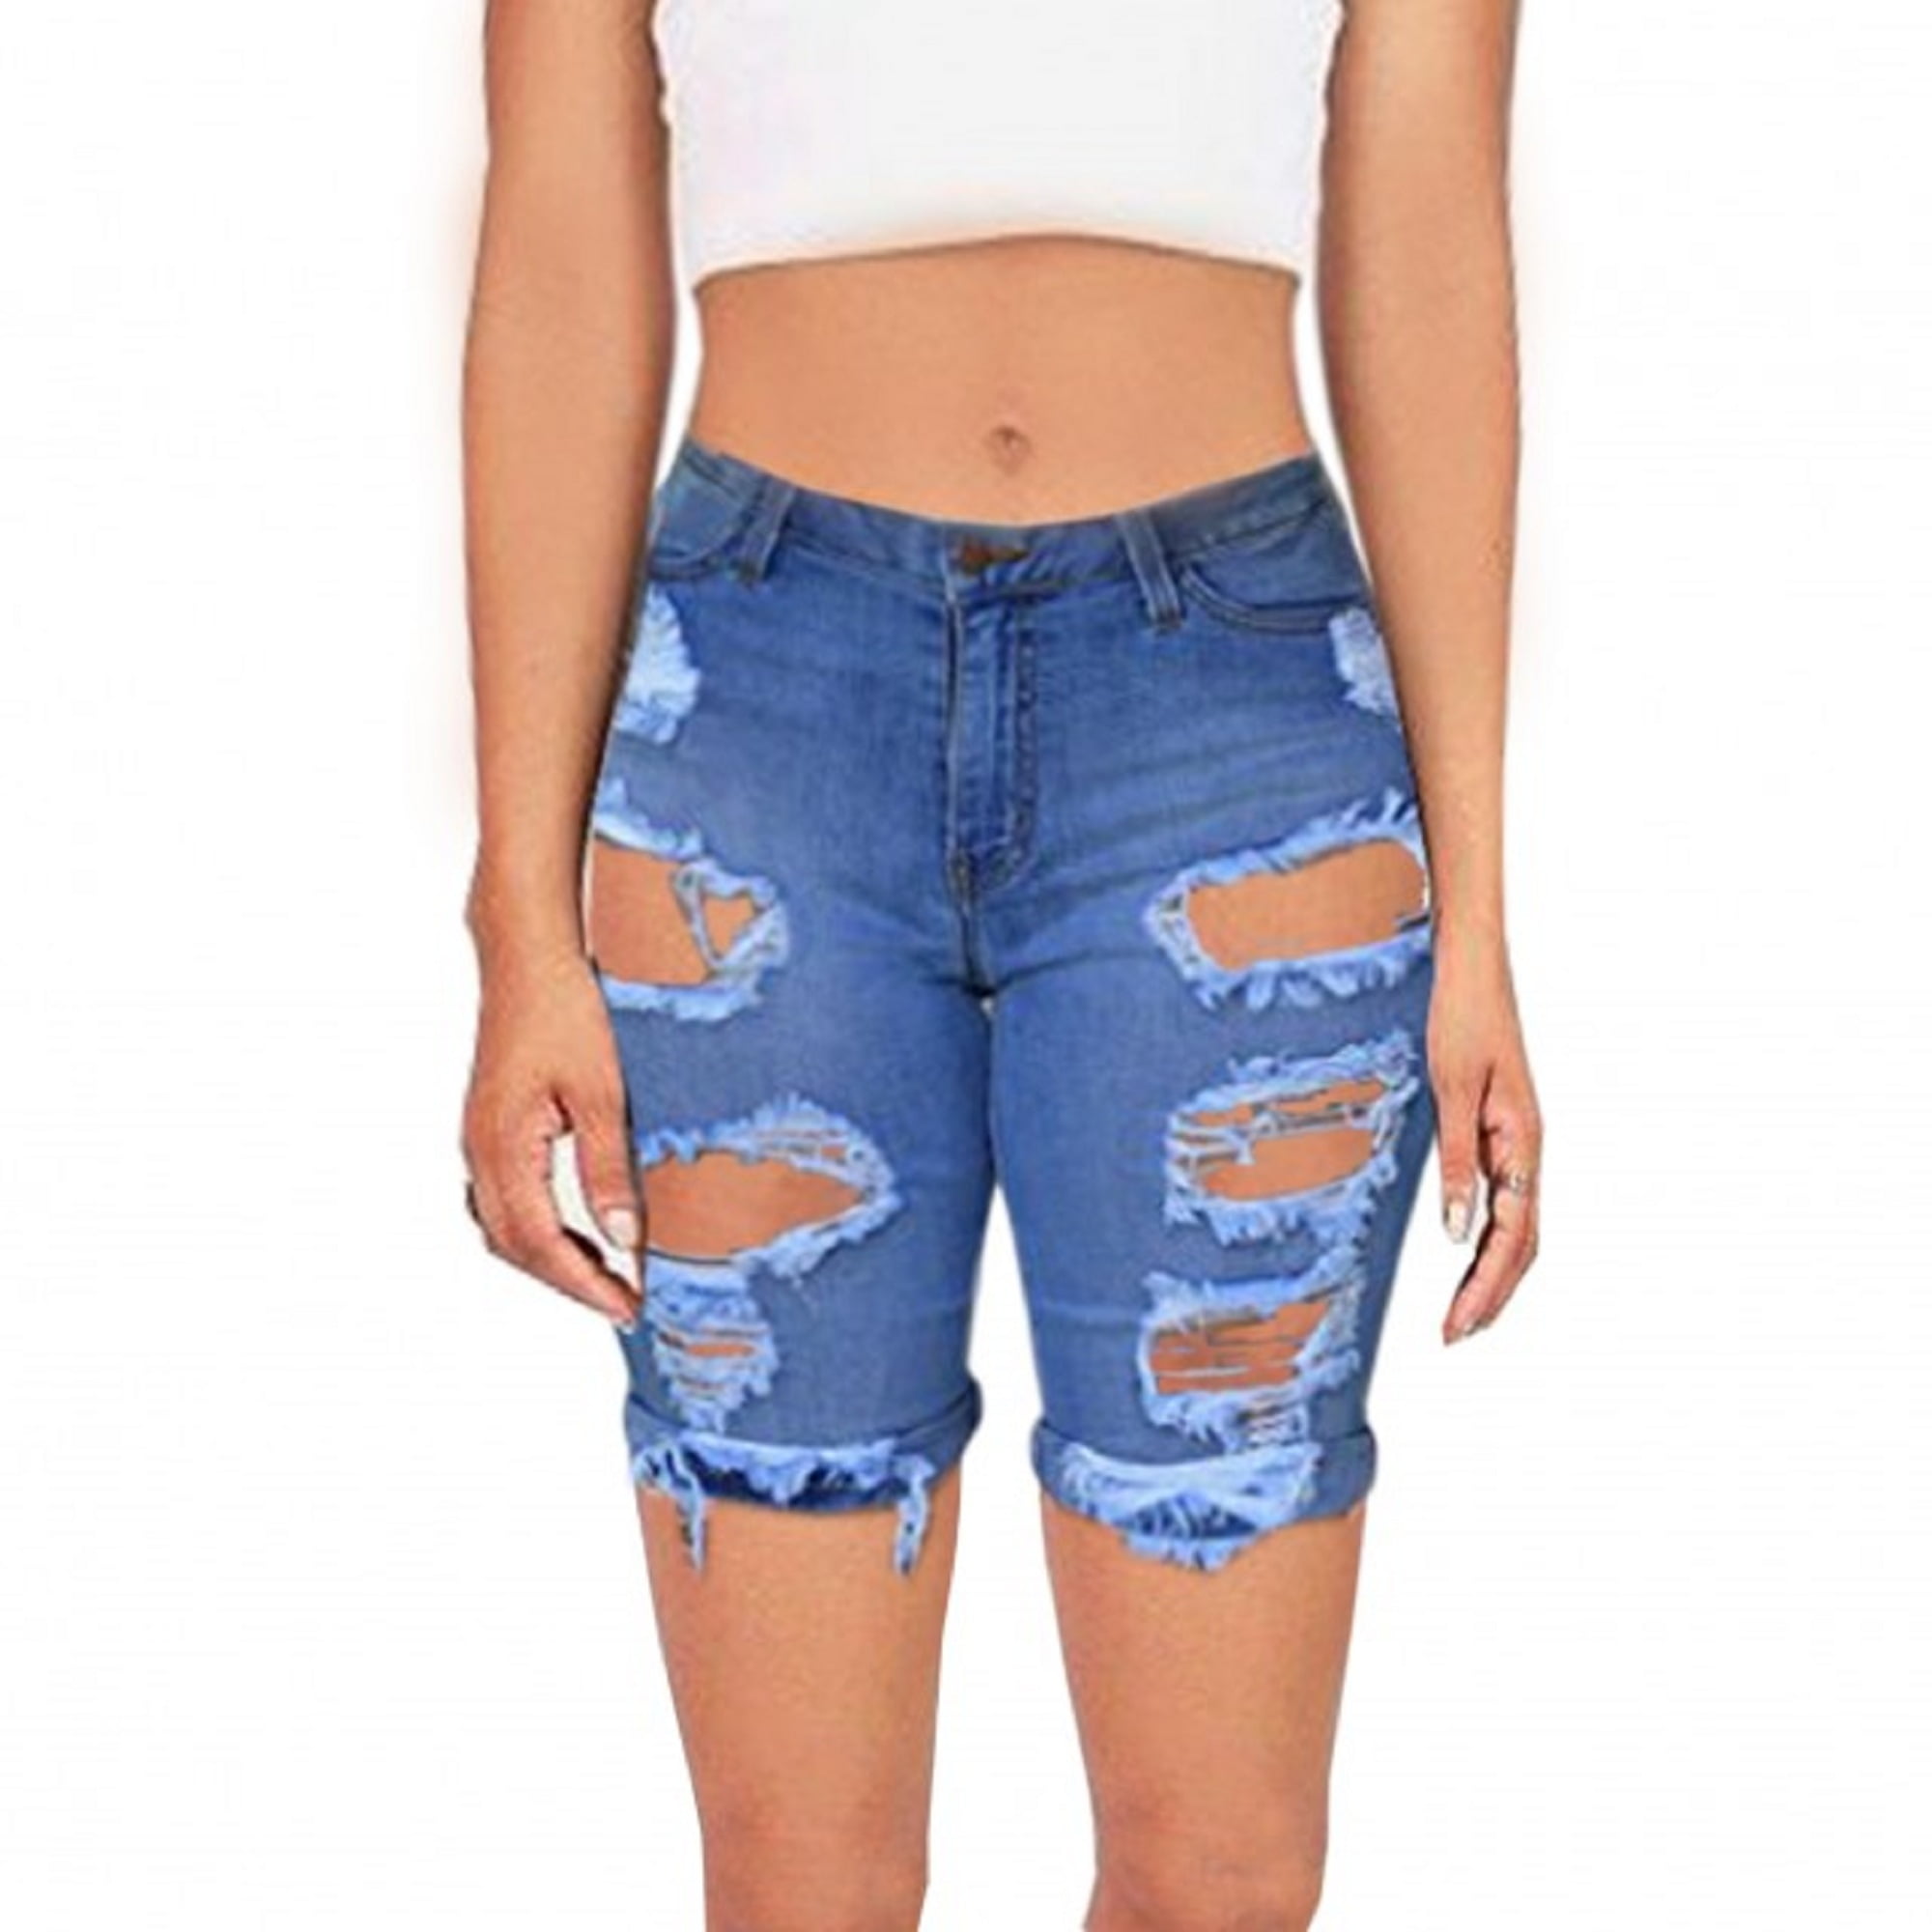 SKYLINEWEARS Women's Distressed Ripped Shorts Mid Rise Knee Length Hole ...